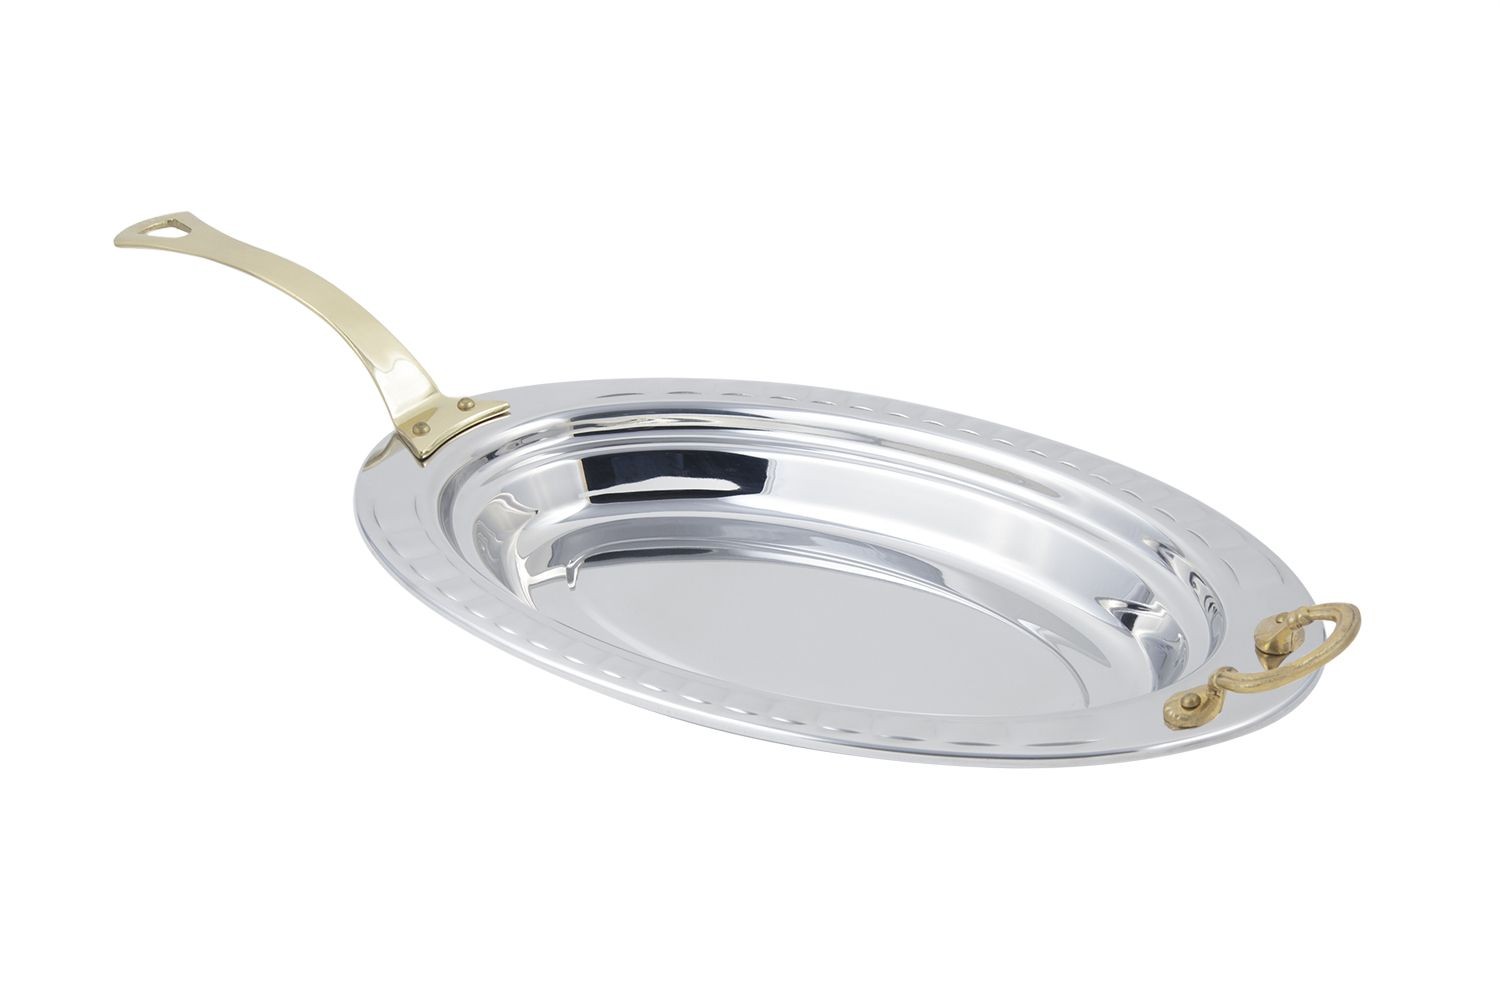 Bon Chef 5688HL Arches Design Oval Pan with Long Brass Handle, 2 1/2 Qt.